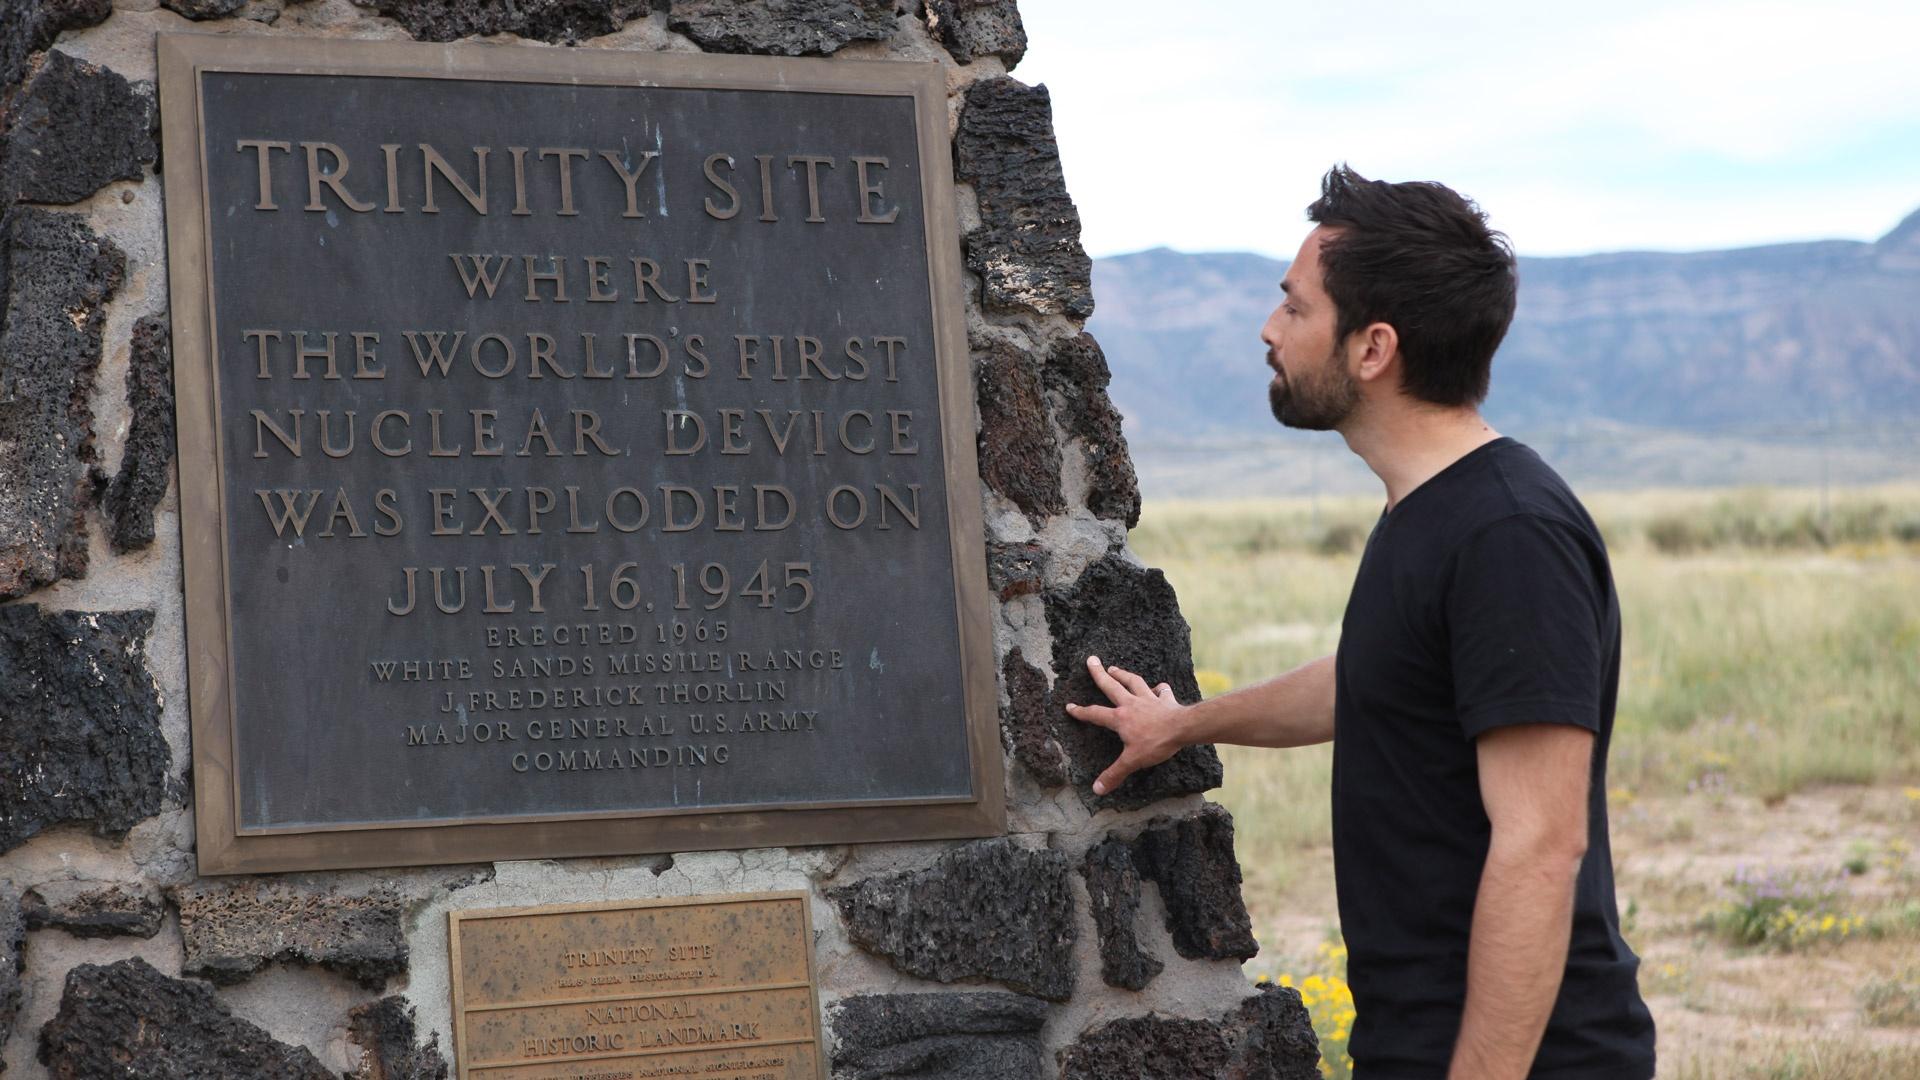 Dr. Derek Muller at the Trinity launch site in New Mexico.